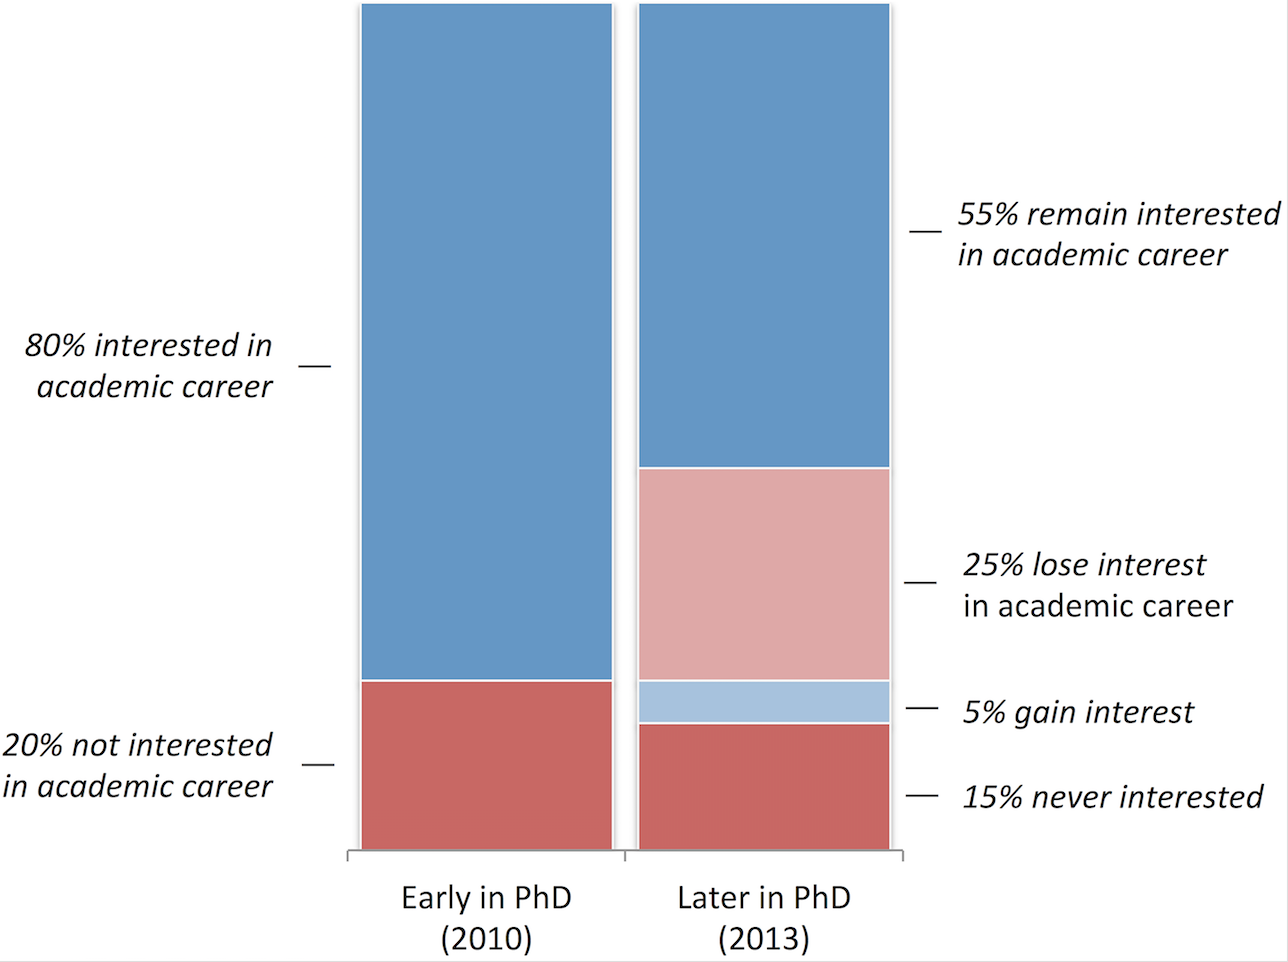 Bar chart from PLOS One shows early in Ph.D. program (2010), 20 percent of students are not interested in an academic career, while 80 percent are interested. Later in the Ph.D. (2013), 15 percent say they were never interested in an academic career, 5 percent have gained interest, 20 percent have lost interest and 55% remain interested.